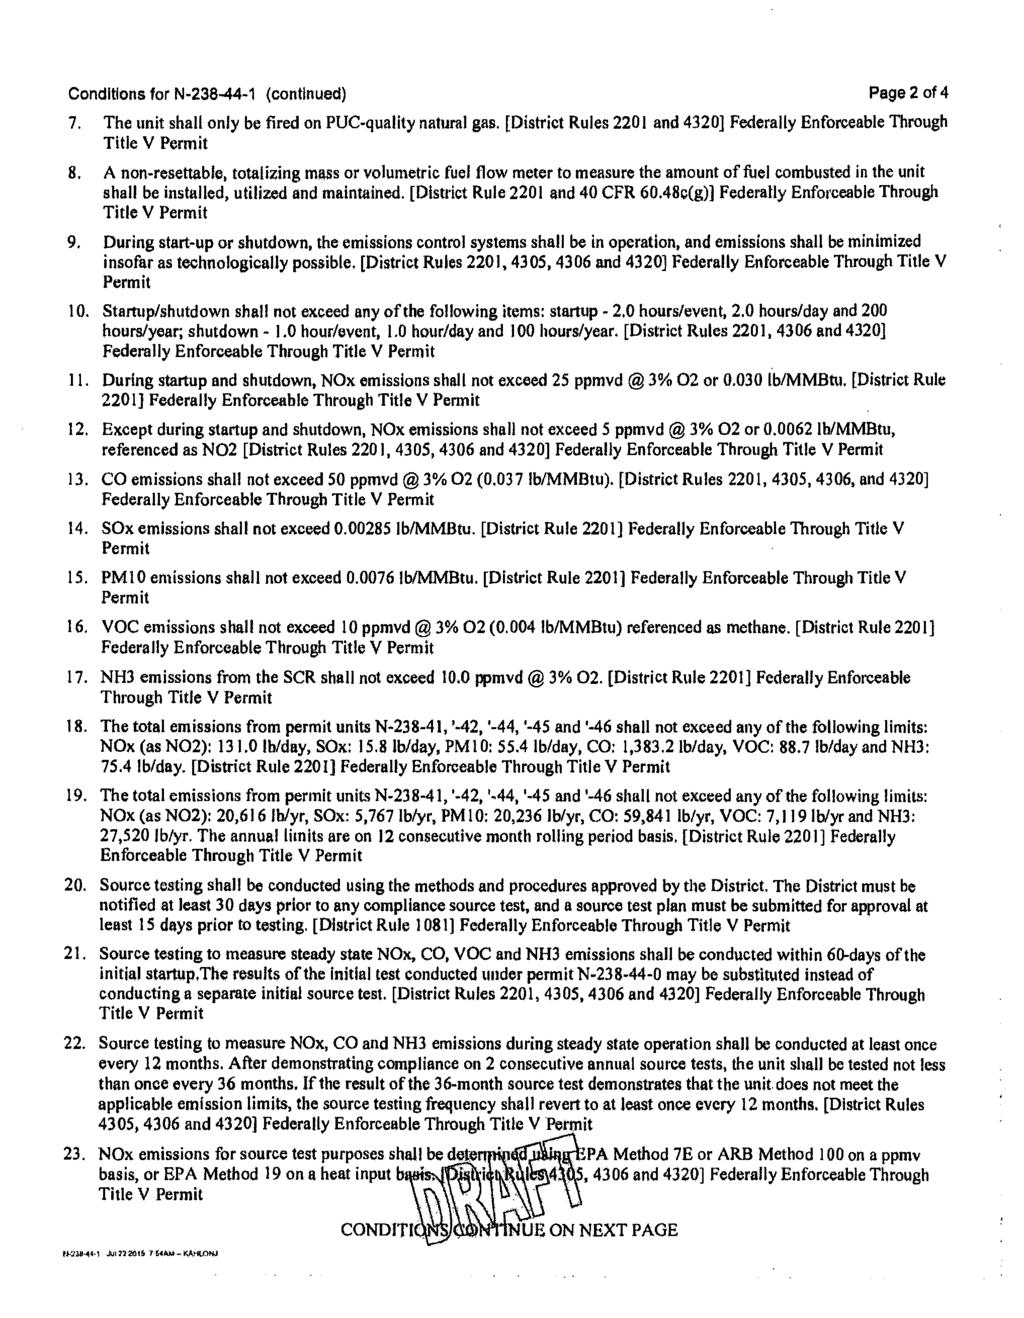 Conditions for N-238-44-1 (continued) Page 2 of 4 7. The unit shall only be fired on PUC-quality natural gas. [District Rules 2201 and 4320] Federally Enforceable Through Title V Permit 8.